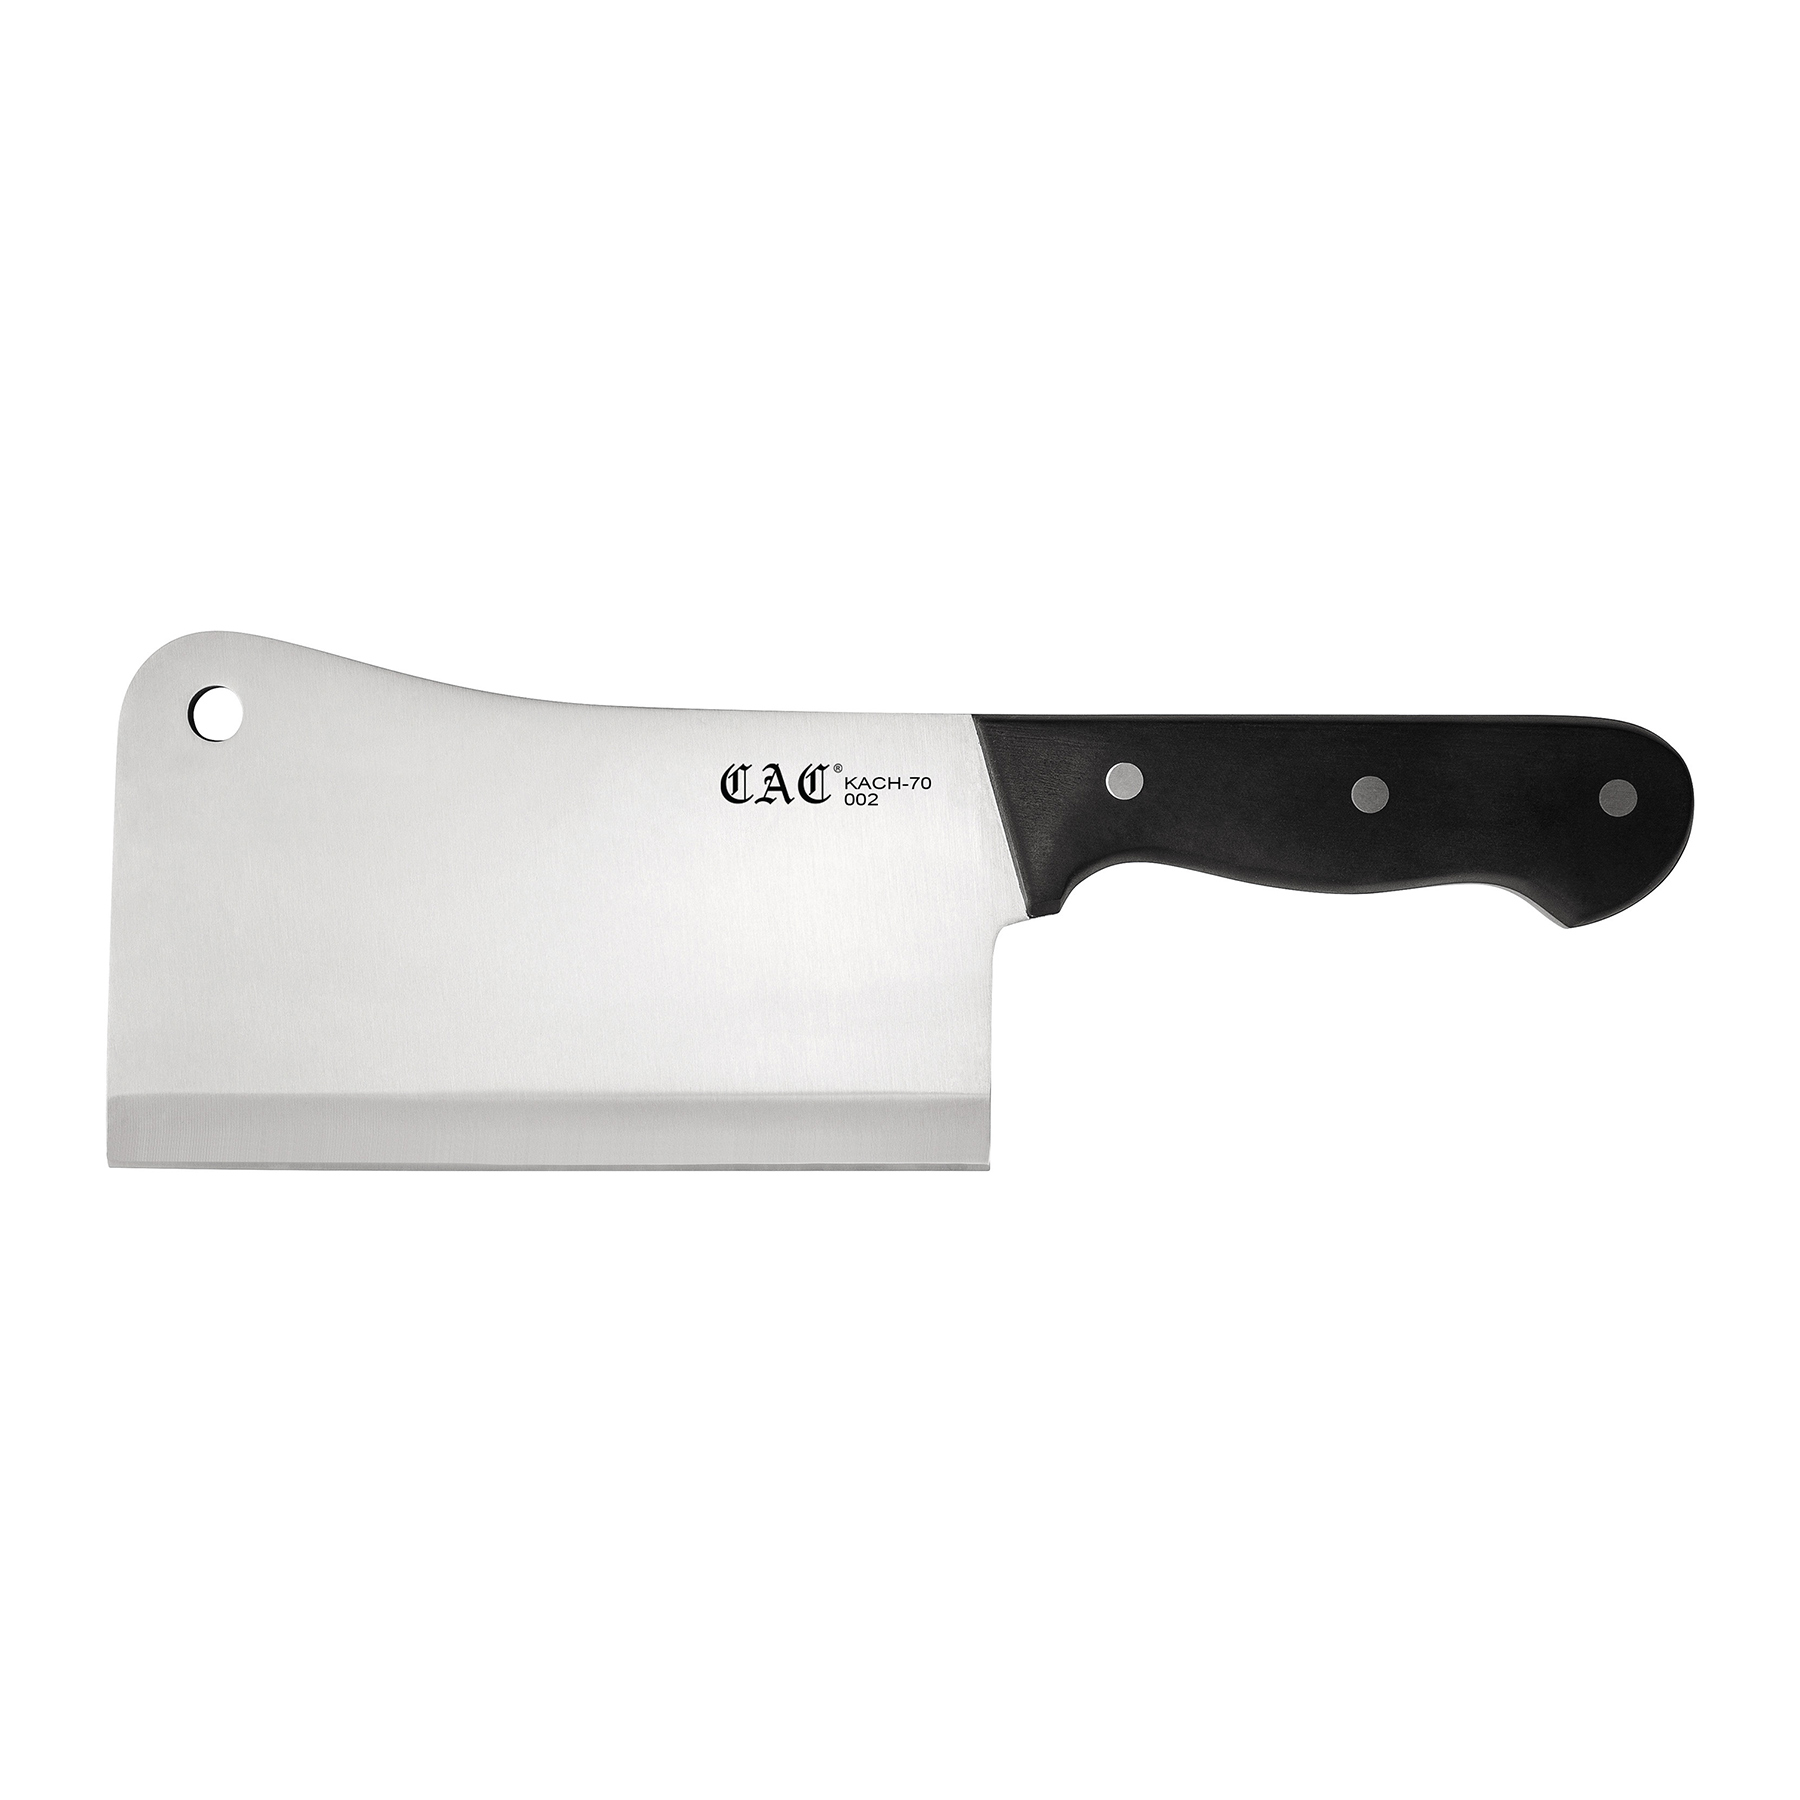 CAC China KACH-70 Heavy Duty Stainless Steel Asian Cleaver 7"